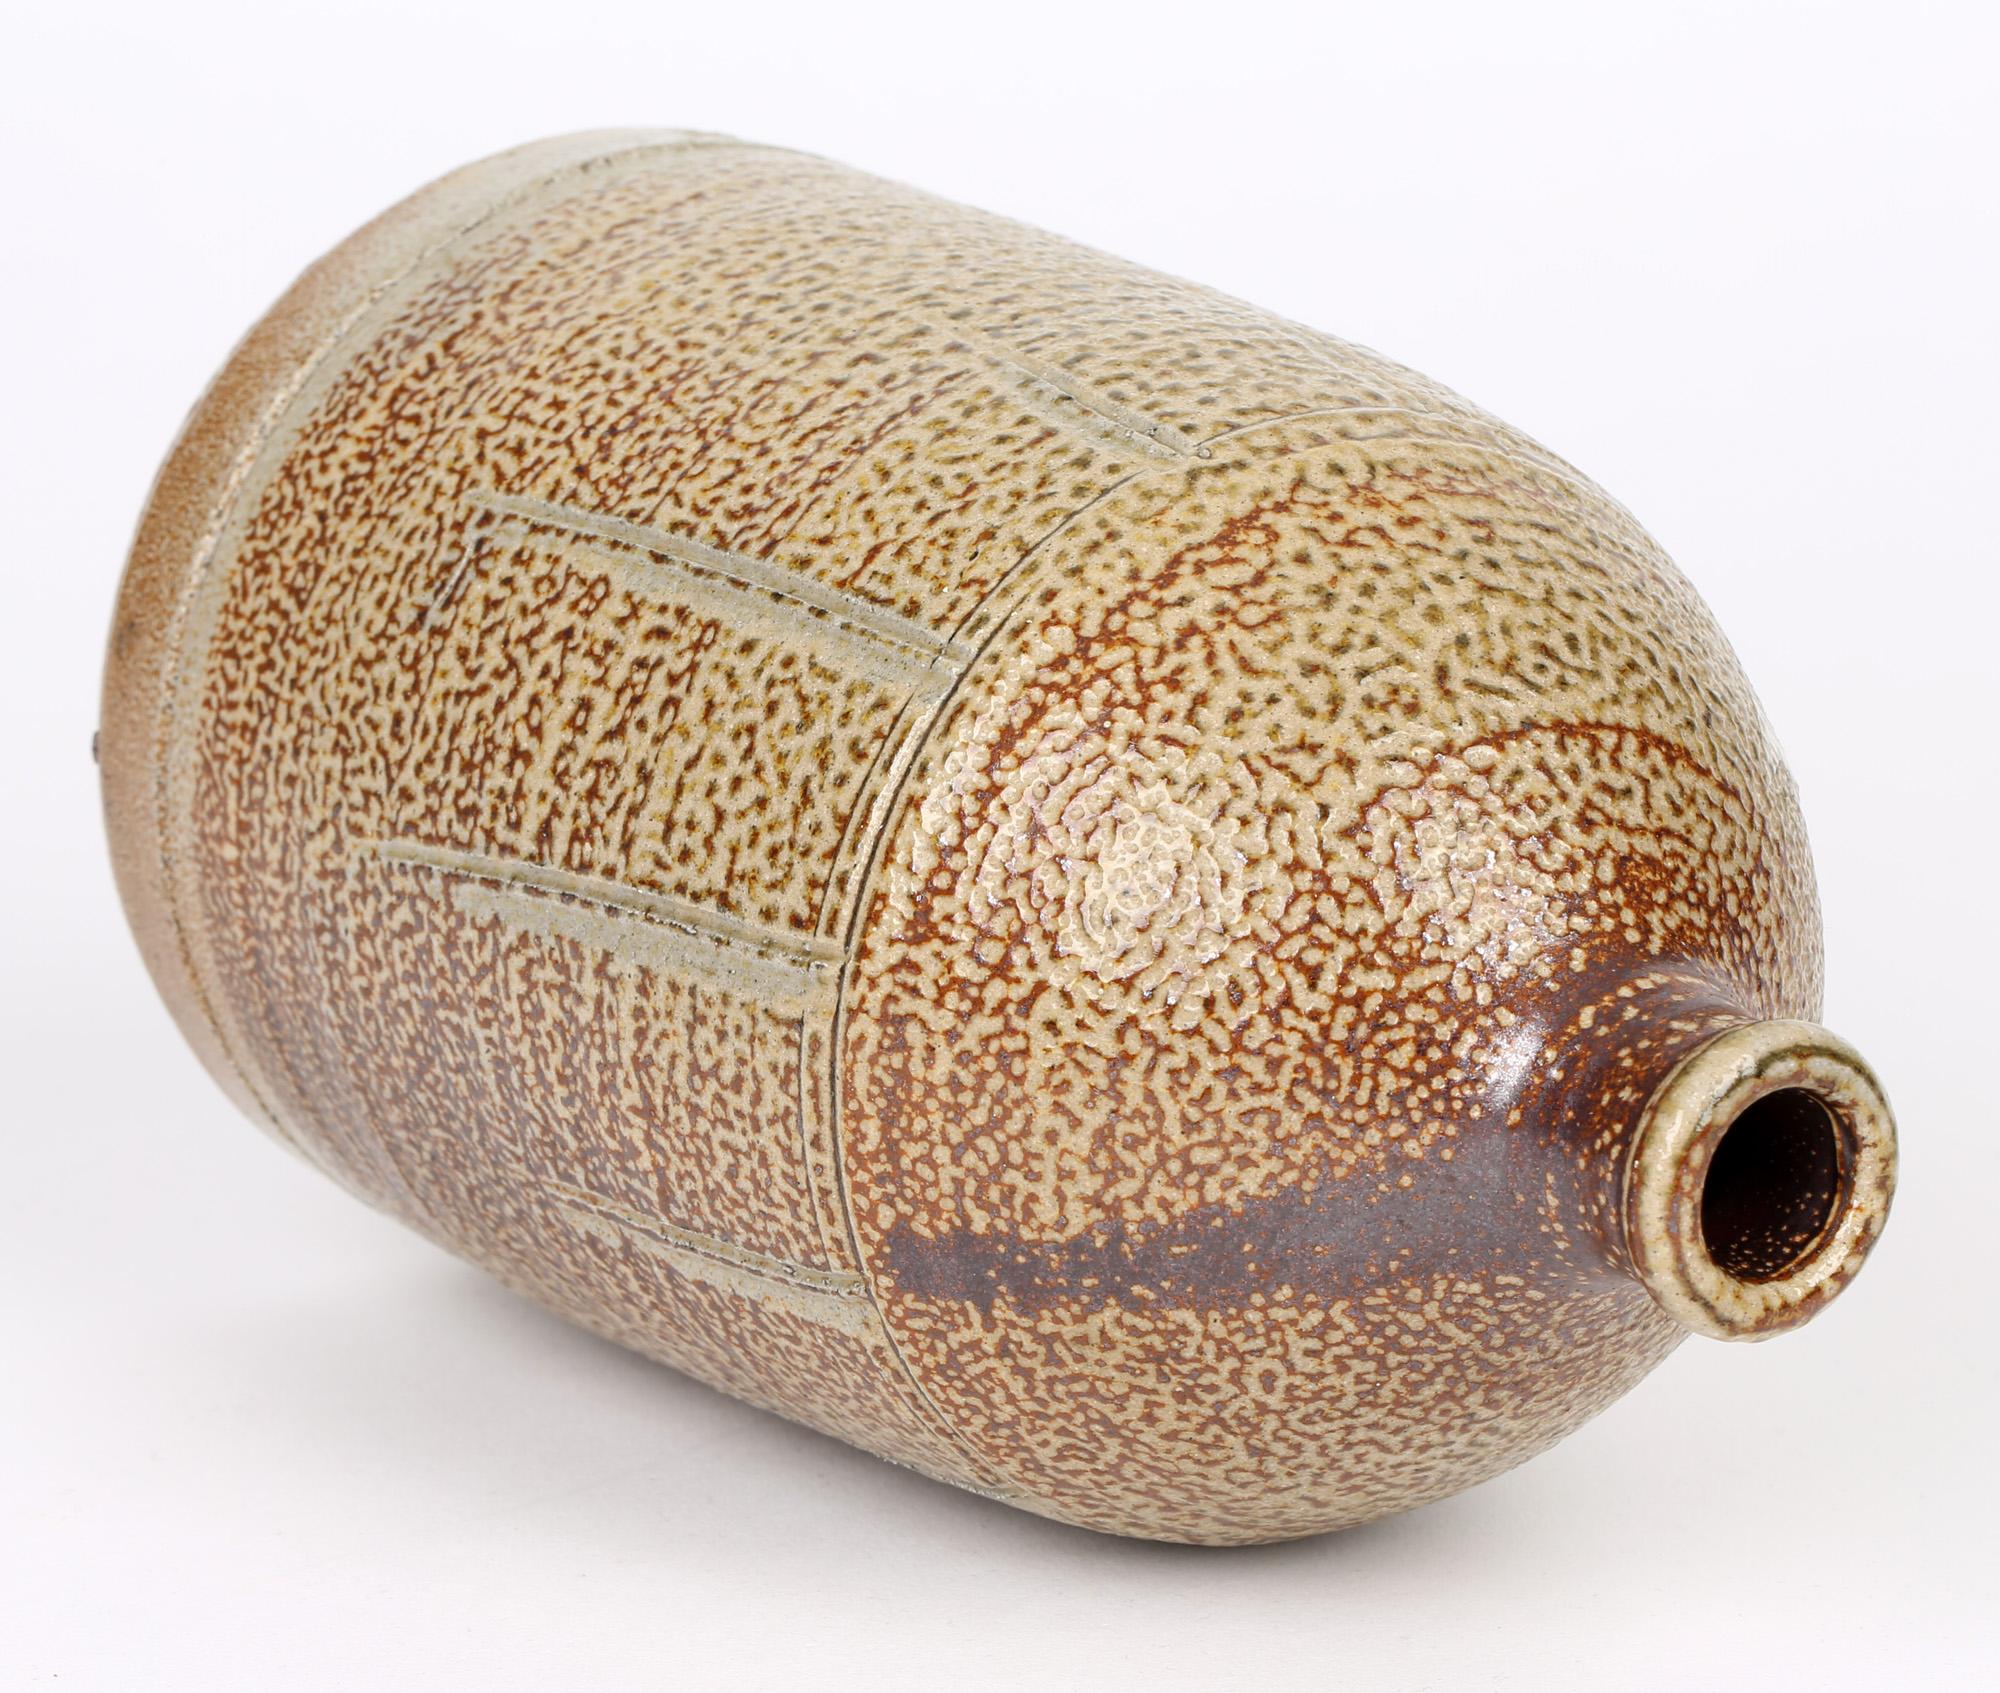 A very fine quality salt glazed studio pottery bottle flagon shaped vase by Dorset based potter Warwick Parker (b.1940) dating from the 20th century. The ceramic vase stands on a wide flat rounded base with a beehive shaped body with a short narrow